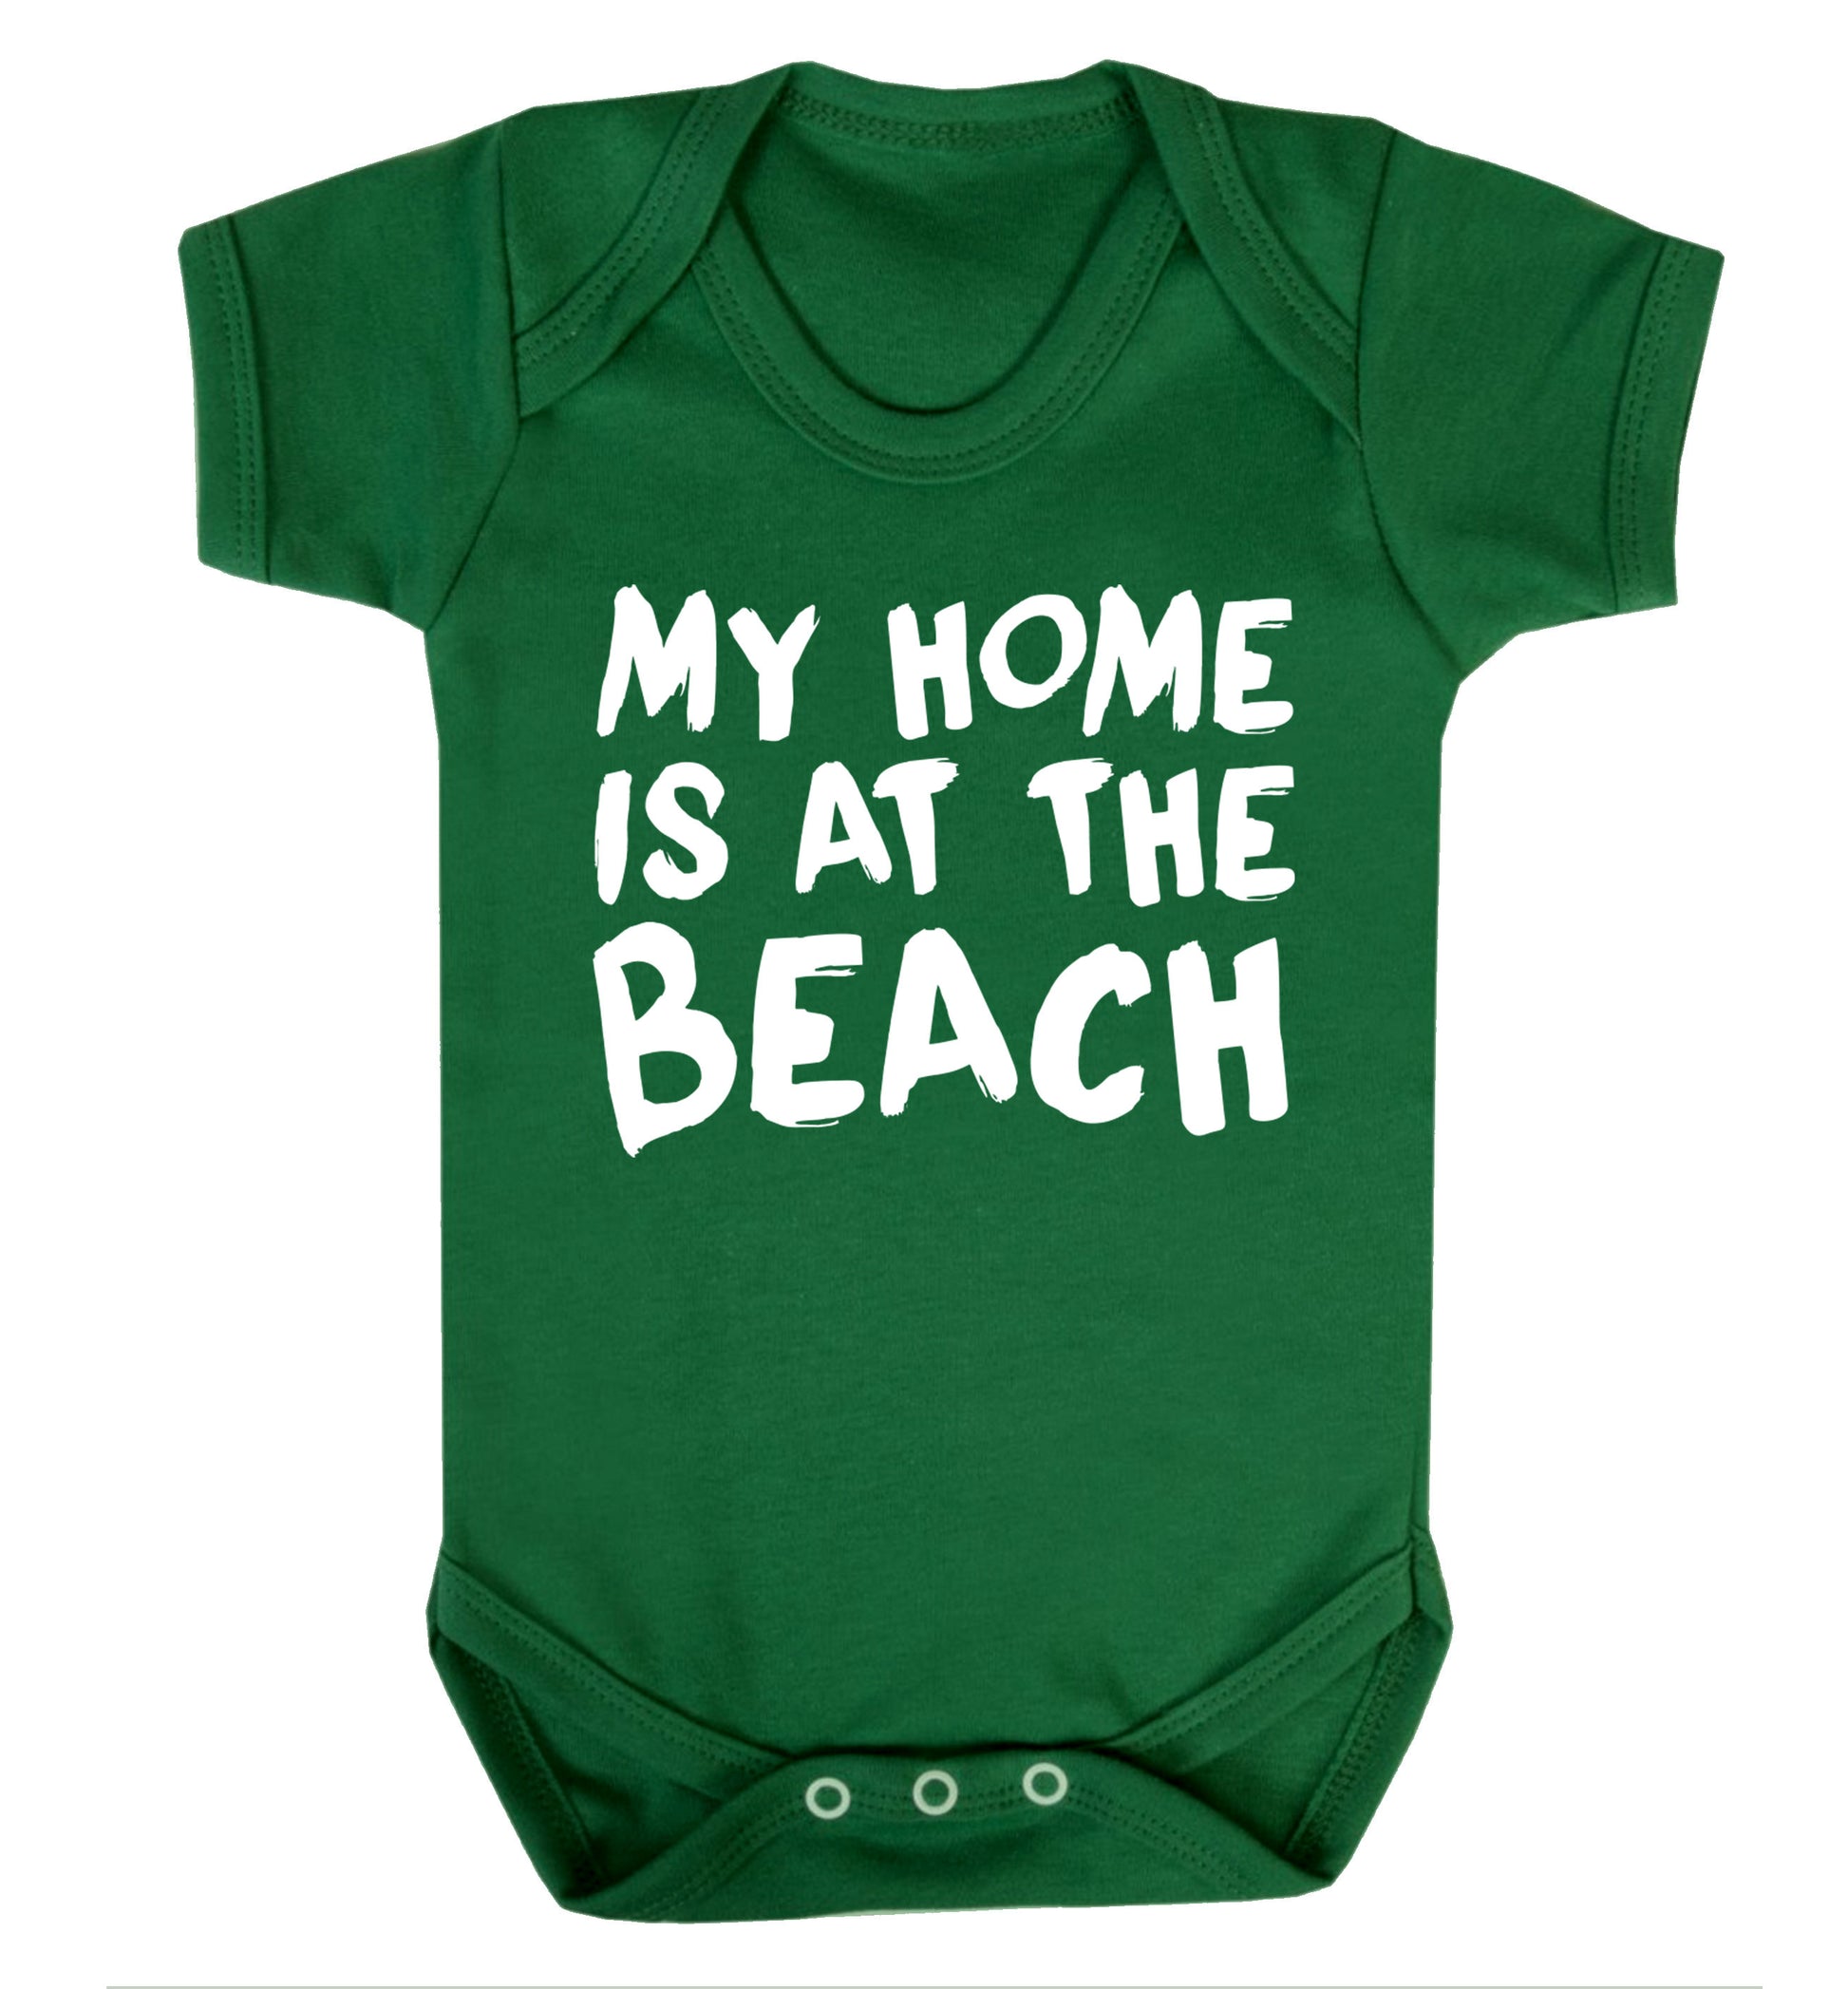 My home is at the beach Baby Vest green 18-24 months